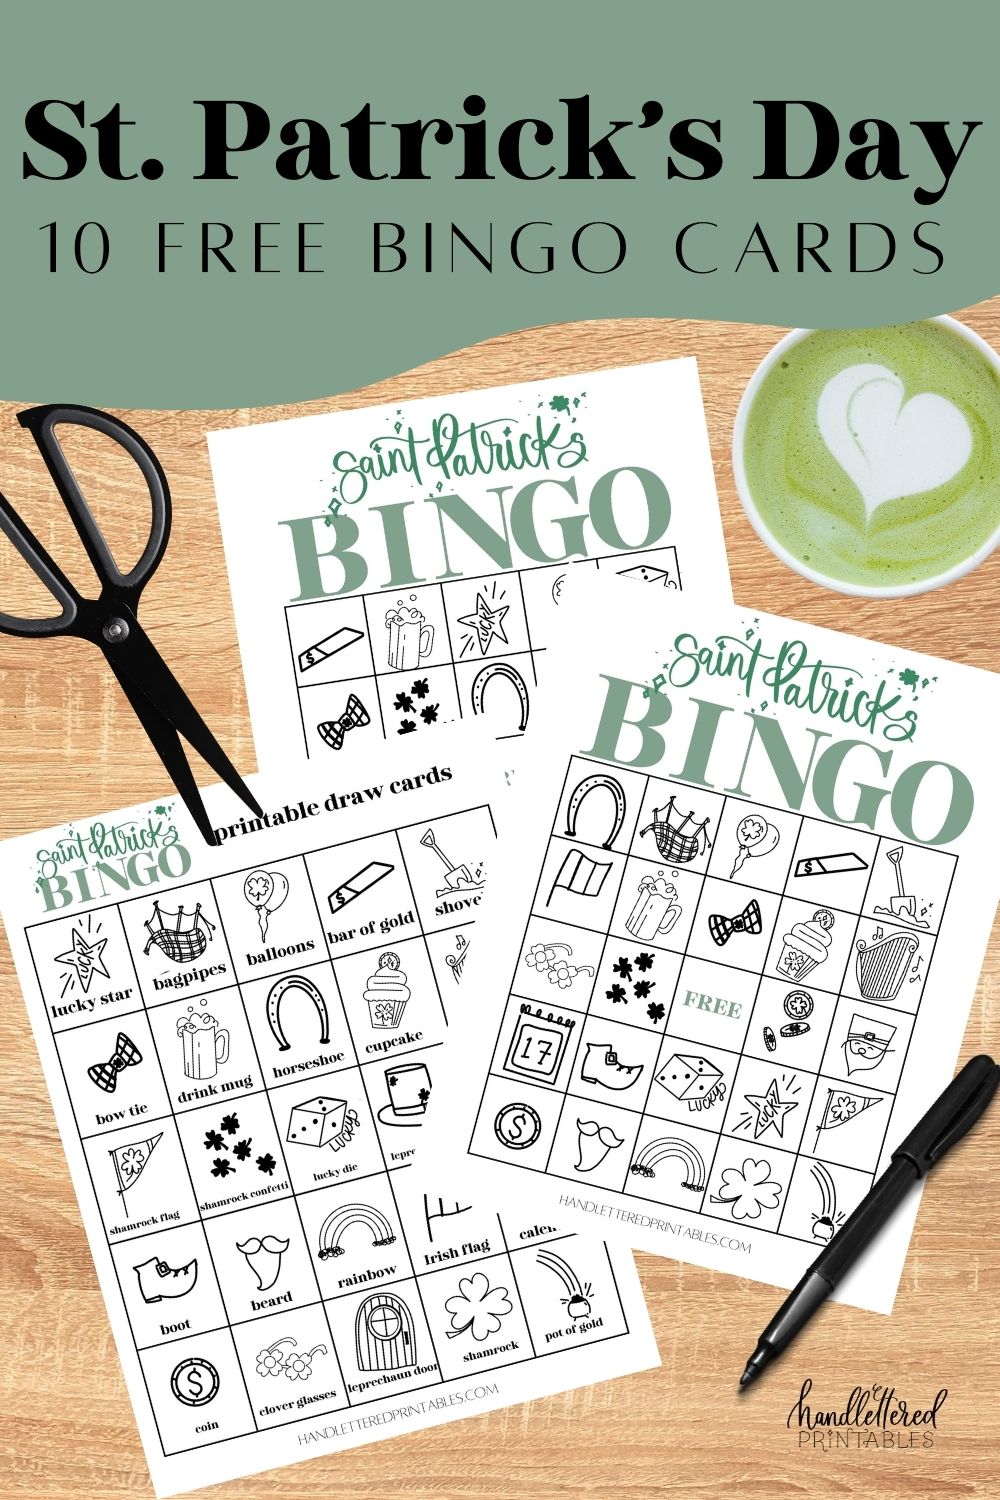 image of two printed saint patrick's day bingo cards with 1 printed saint patricks day bingo calling cards ready to be cut out on wooden table styled with black scissors and black pen beside a green hot beverage text over reads: st patrick's day 10 free bingo cards